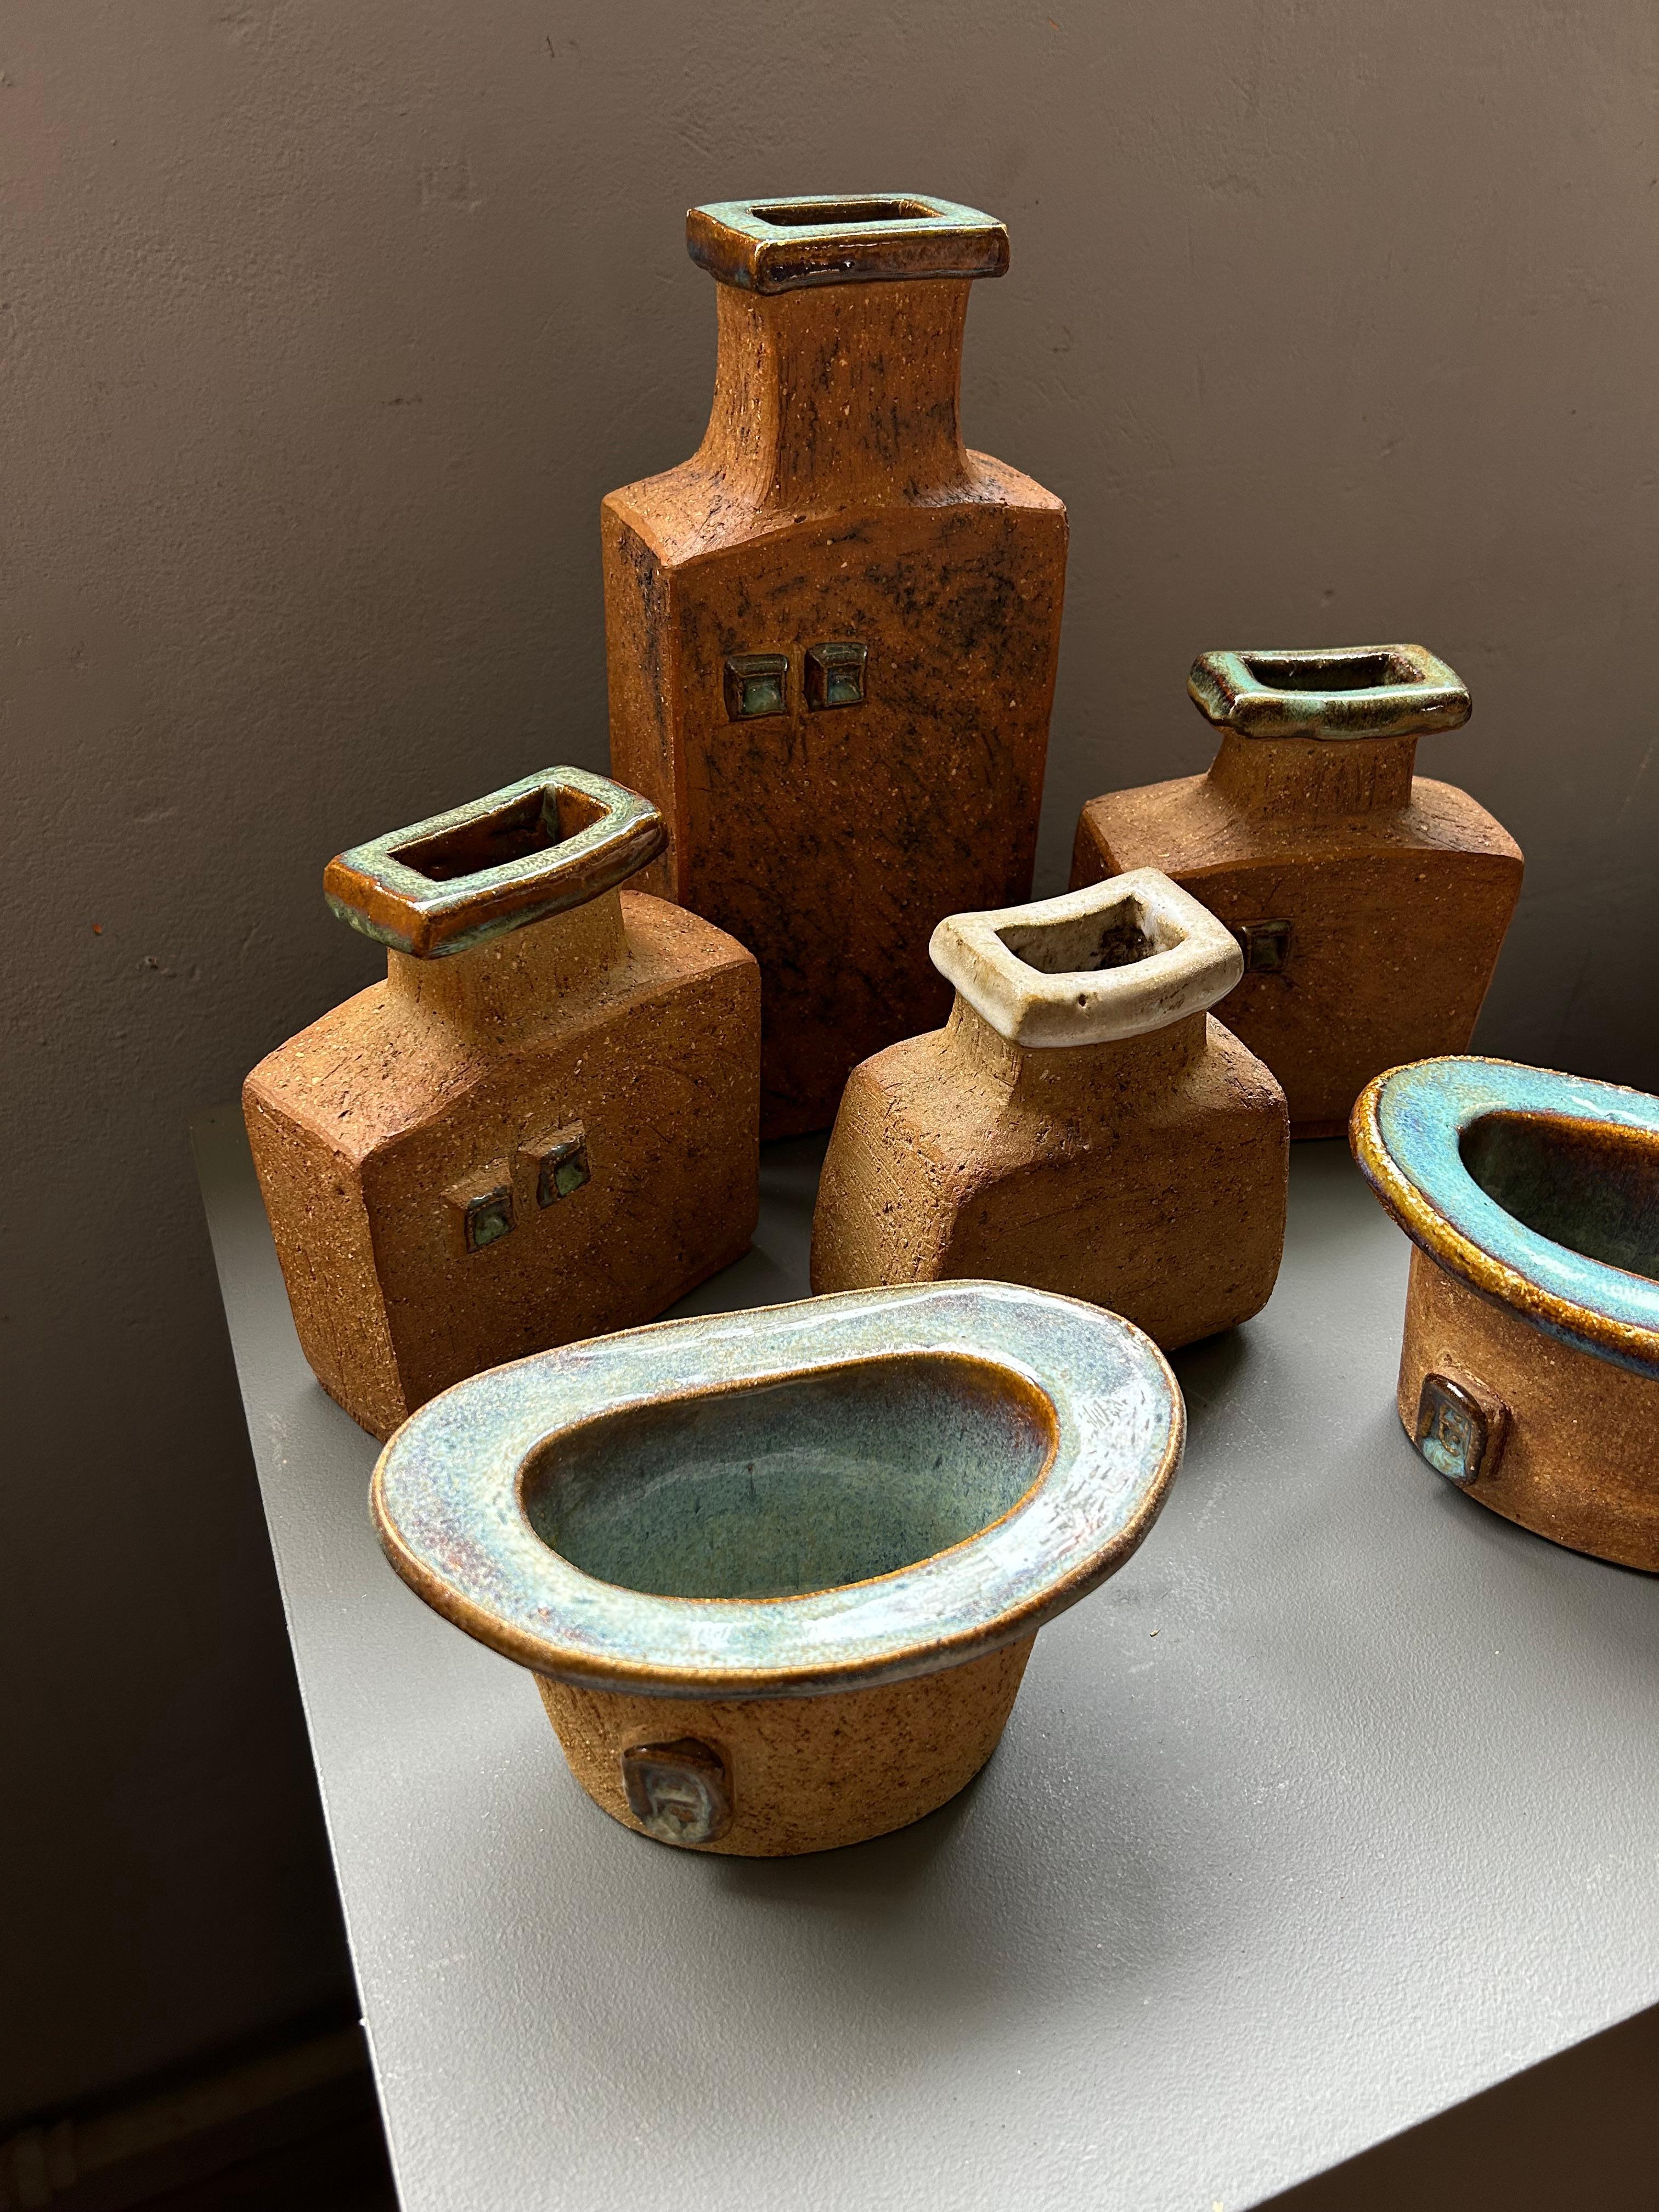 Collection of six very sculptural brutalist vases by Swedish artist Curt Magnus Addin in Sweden in the 1980’s in a unglazed red clay with top edge with a beautiful glaze and two sqaures on the side of each vase which are also glazed.
The vase are in